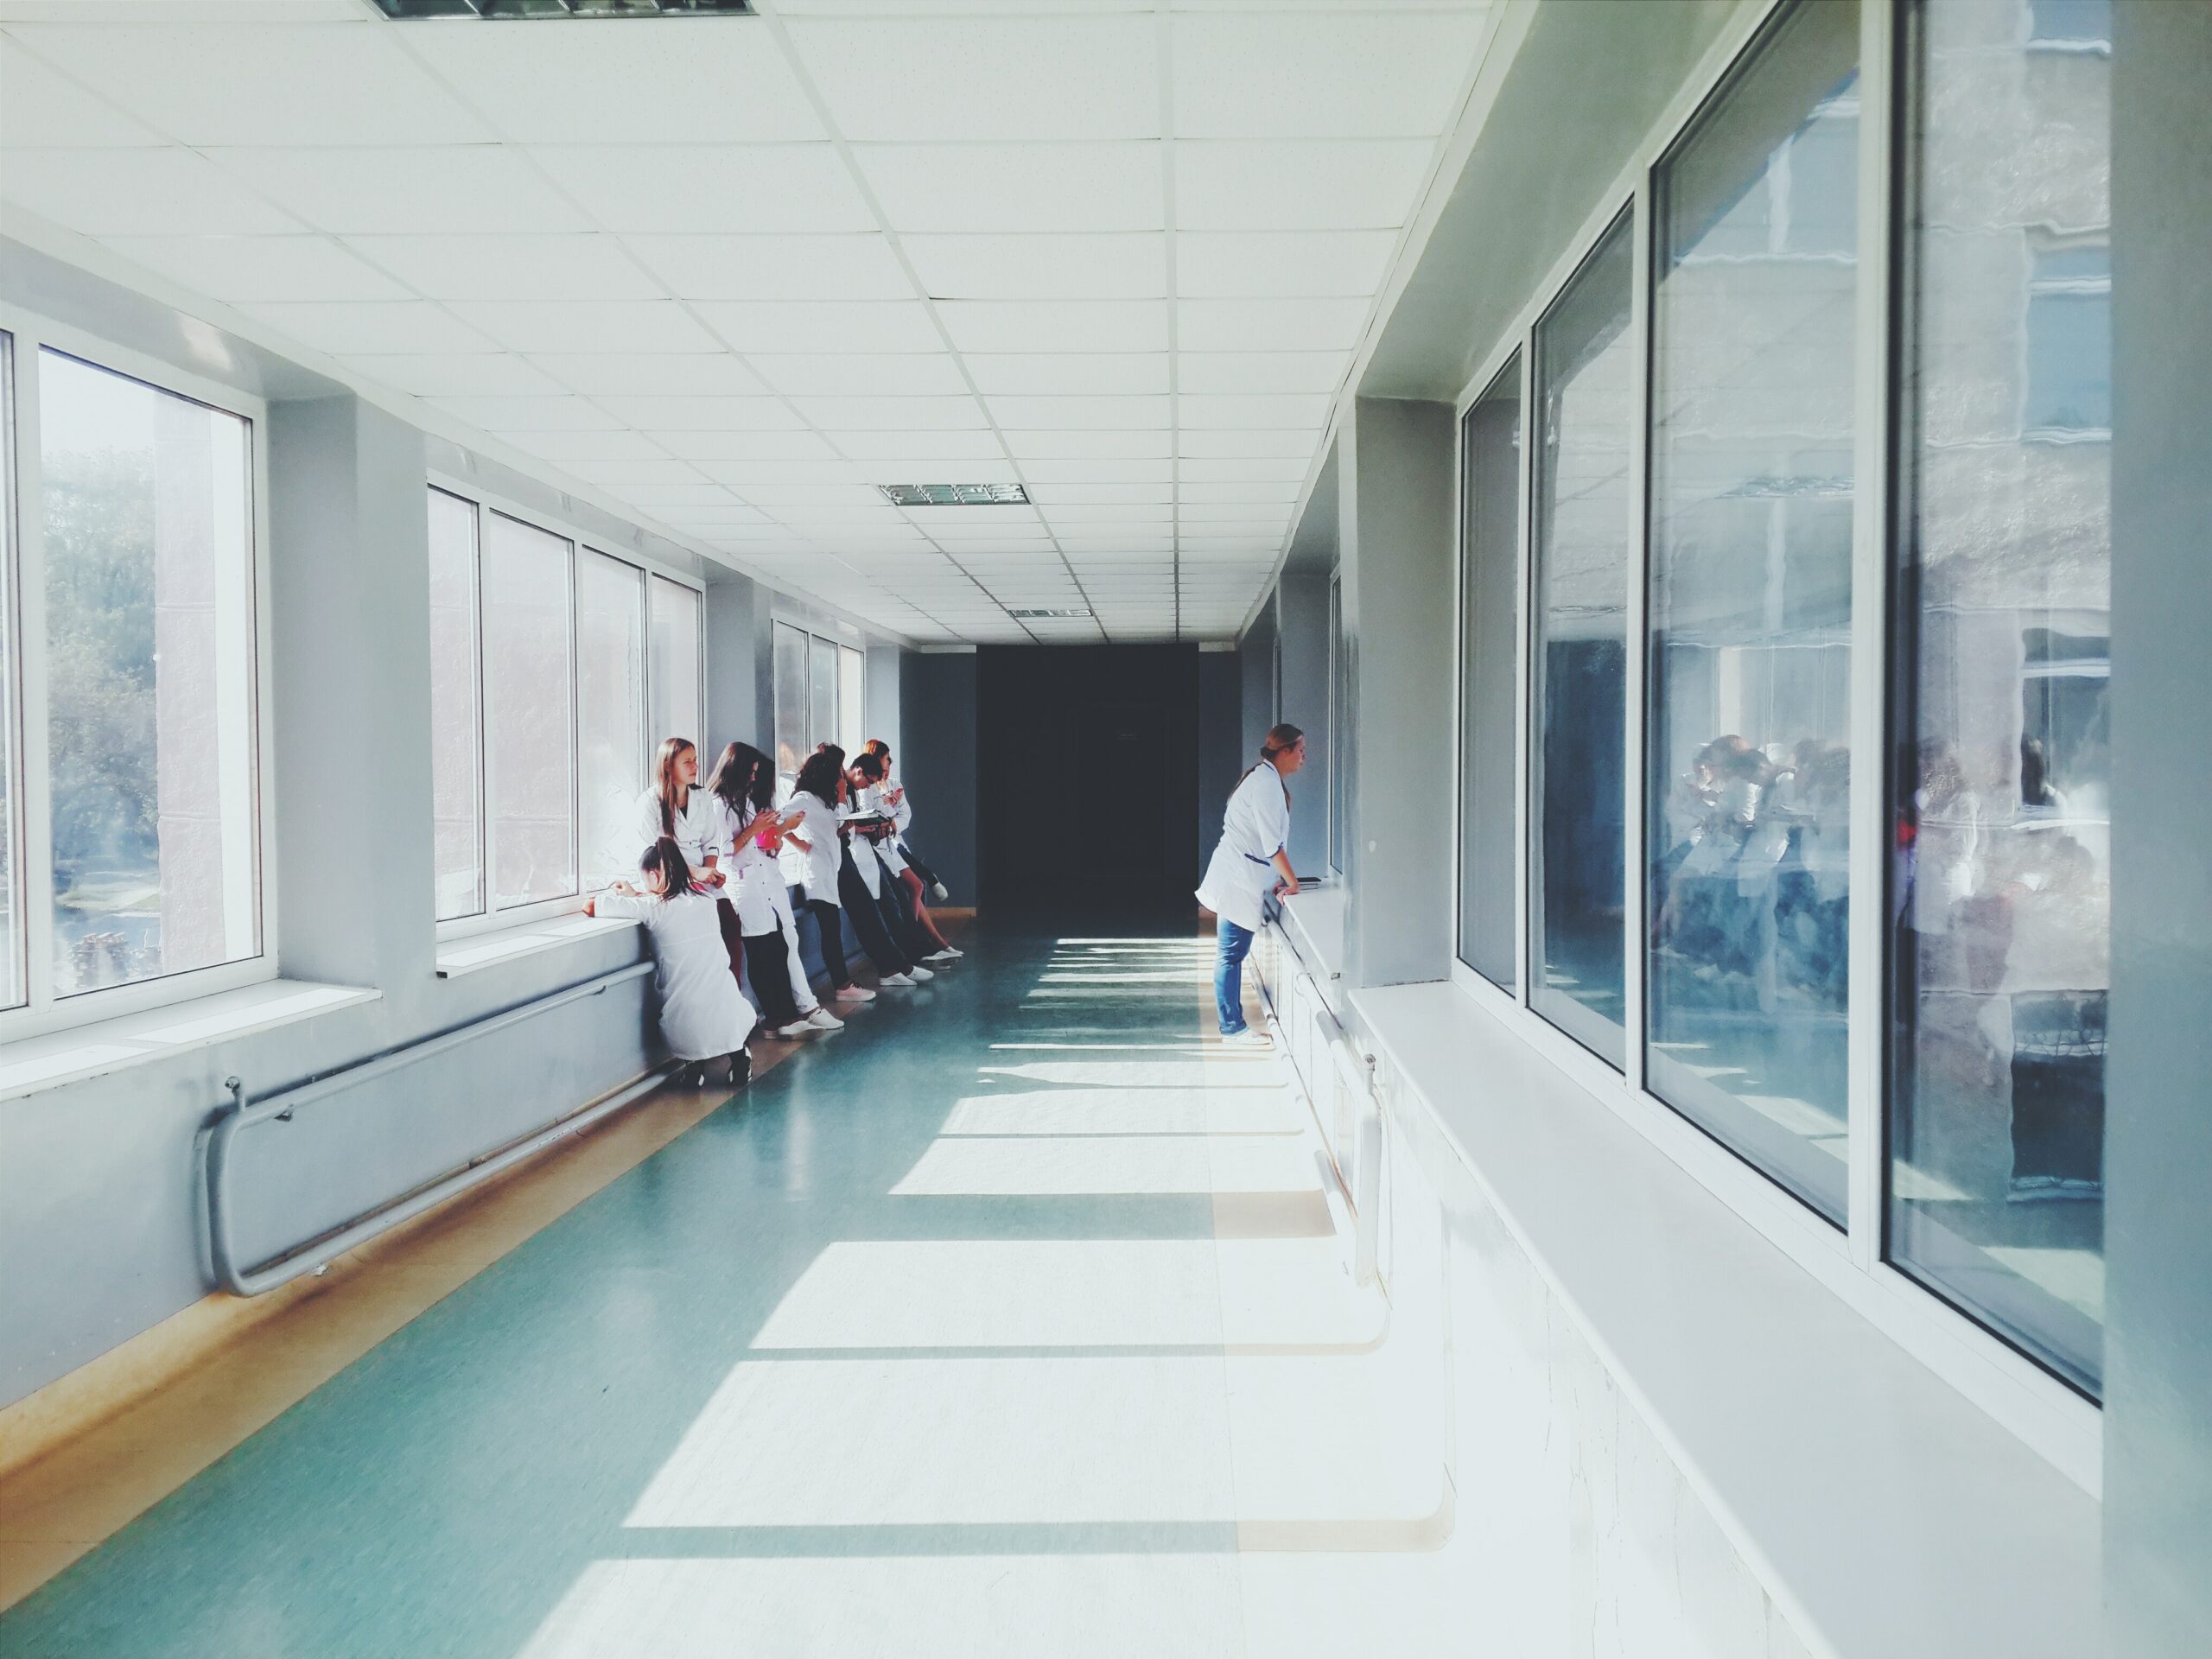 Long hallway in a hospital. One side has floor to ceiling windows and the other has doctors learning against the wall.